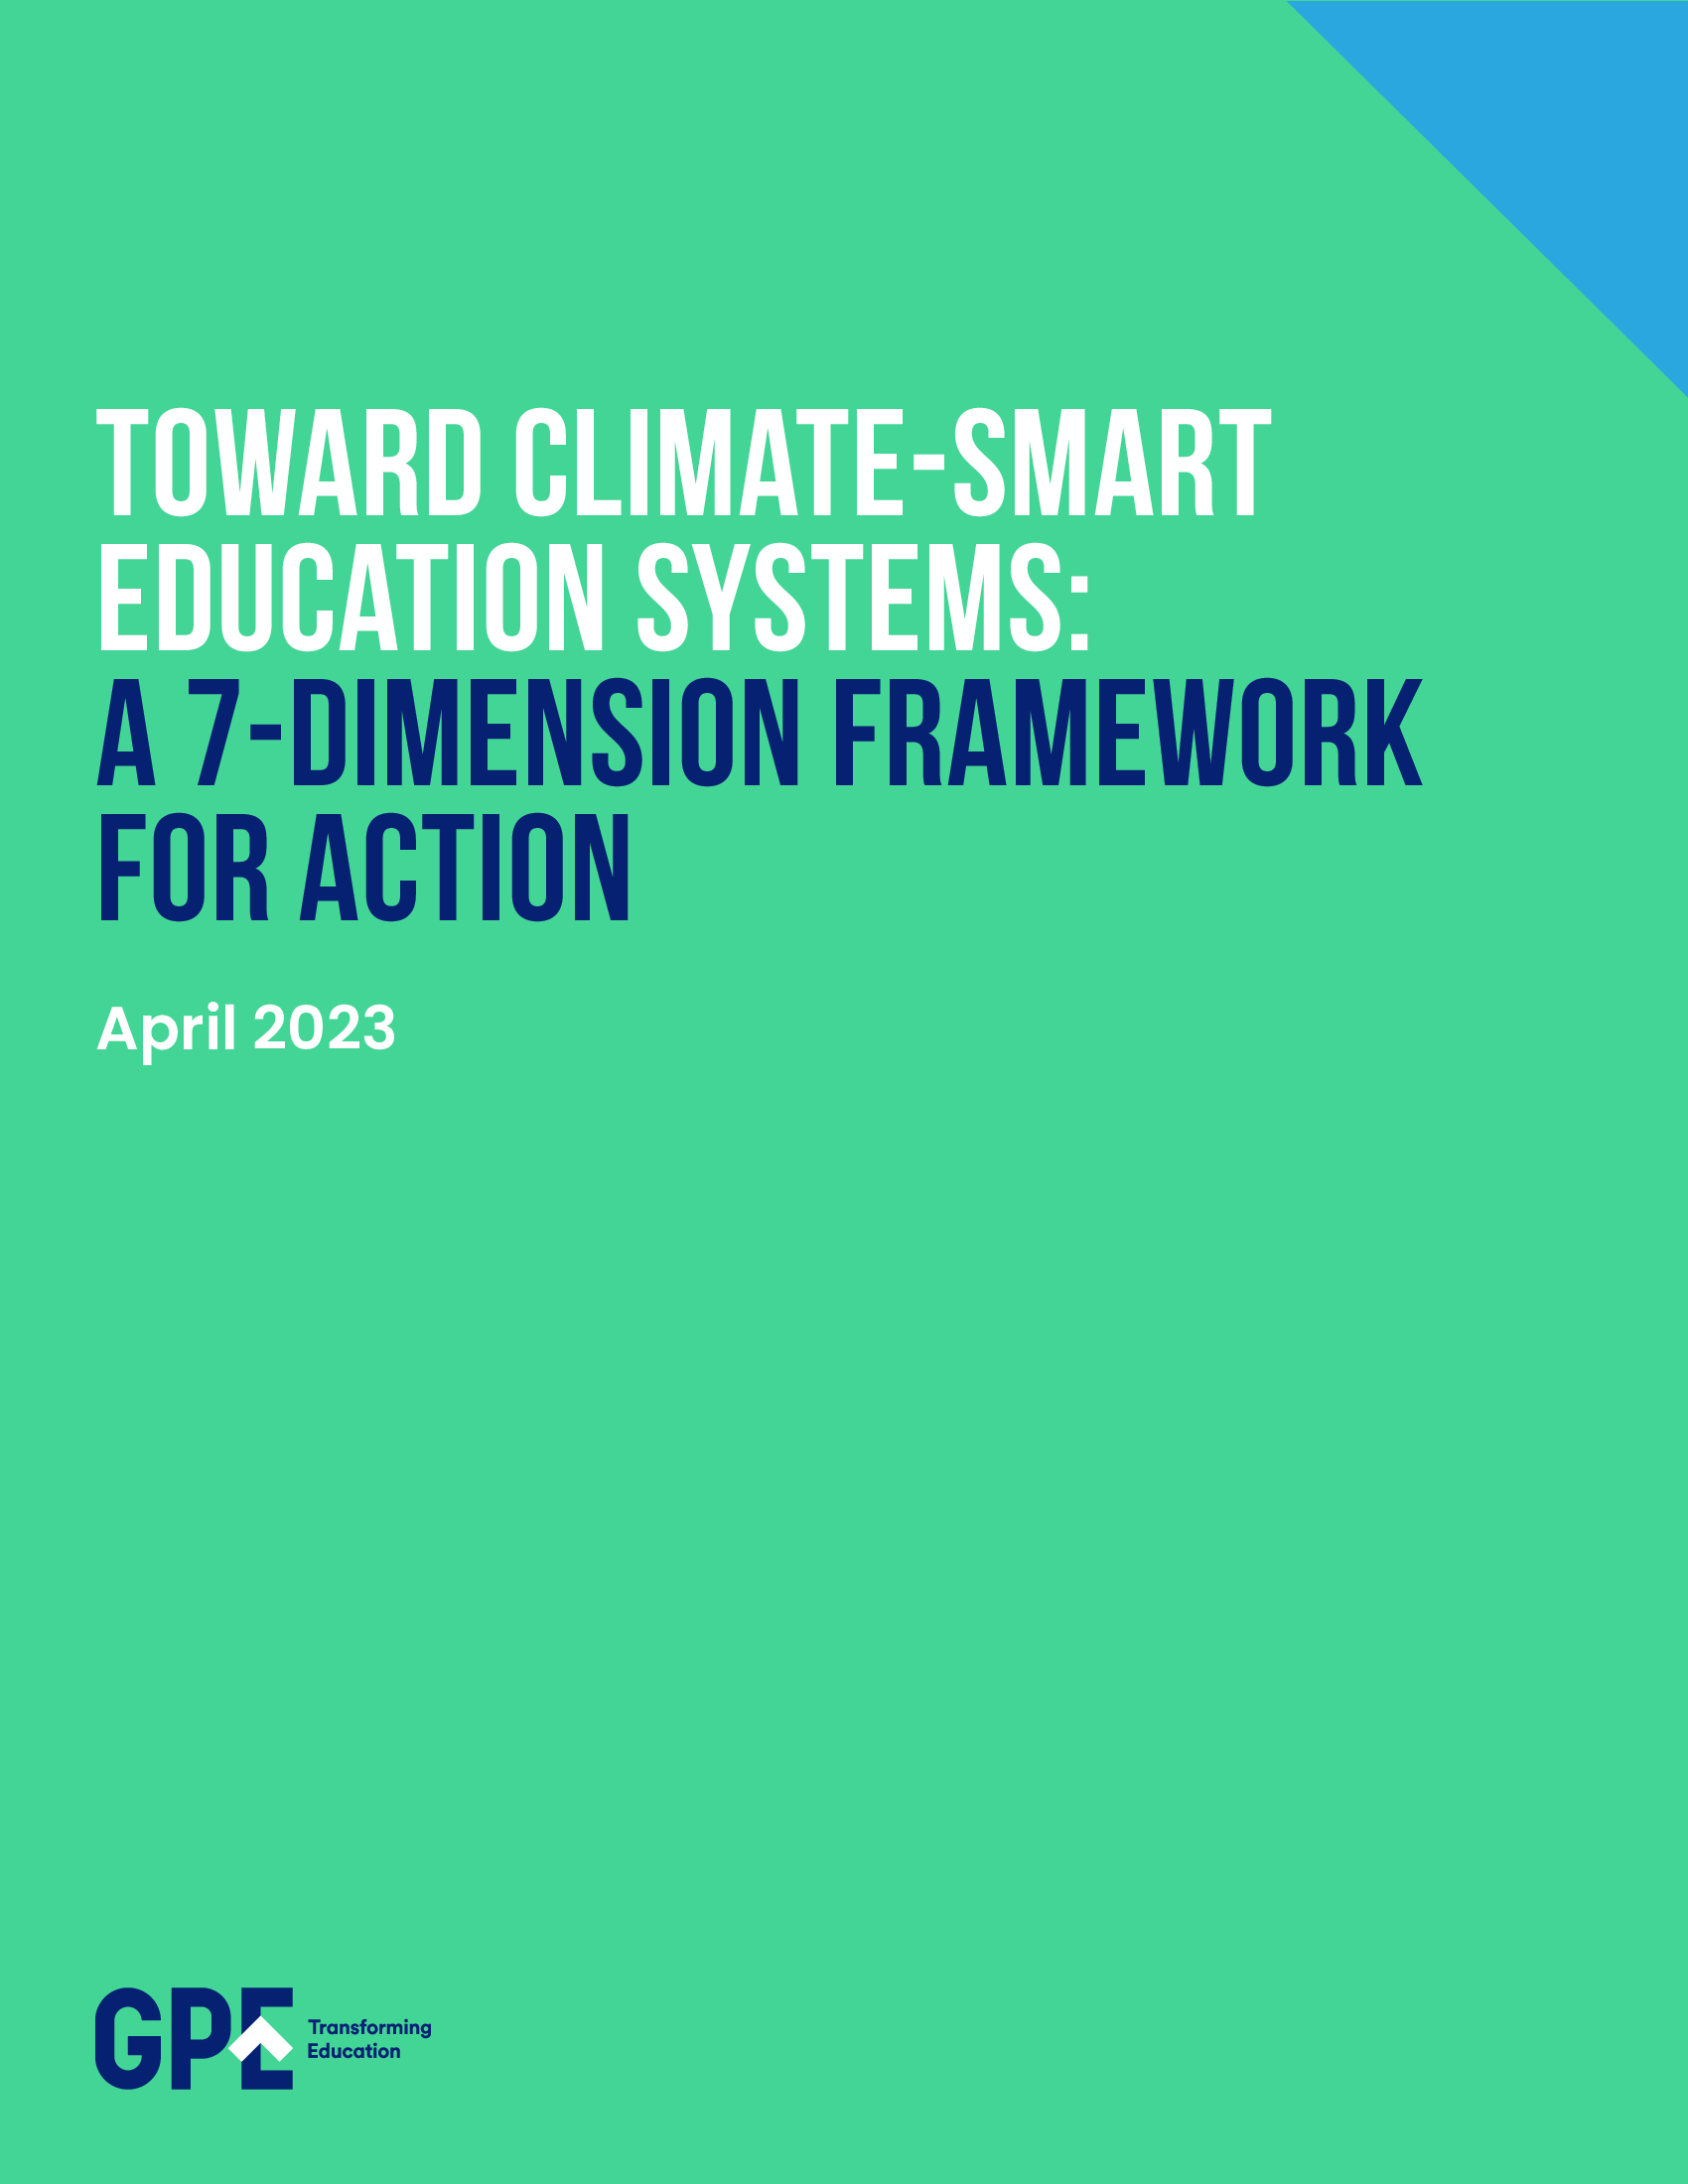 GPE Consultancy on Building a Framework for Climate-Smart Education Systems